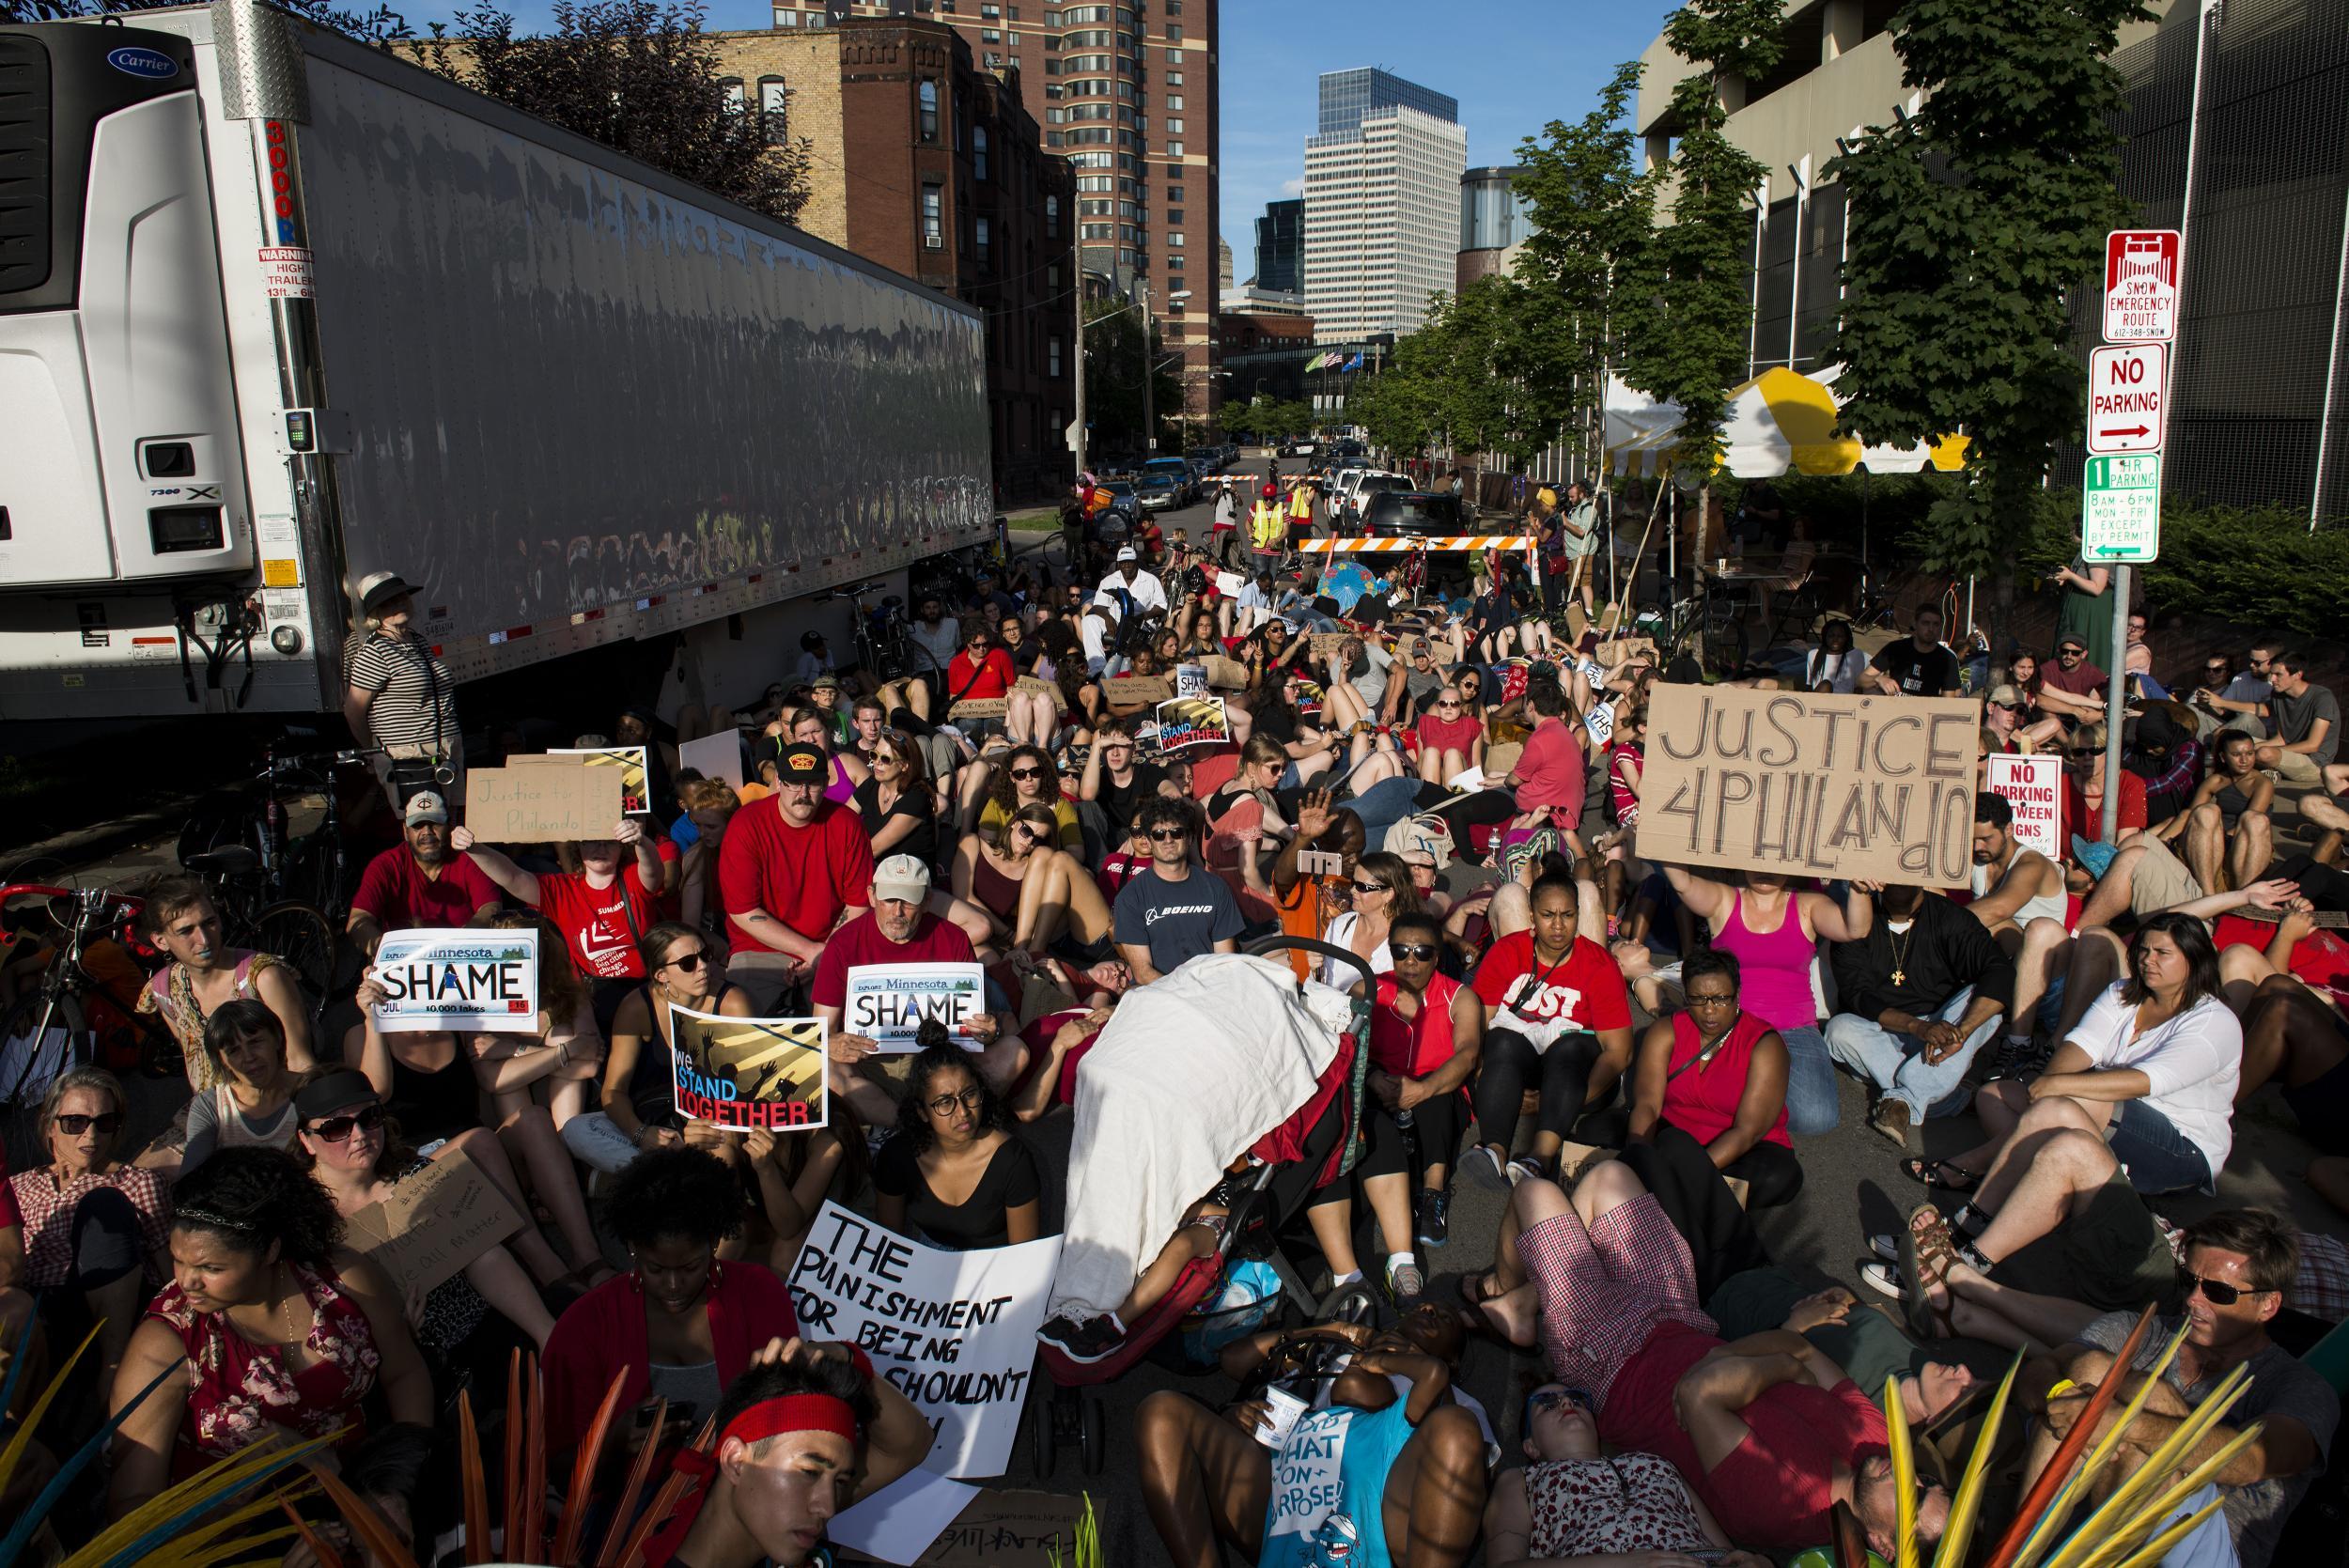 Activists protest the death of Philando Castile on July 9, 2016 in downtown Minneapolis, Minnesota. Protestors were blocked from entering the Basilica Block Party, a music festival in downtown Minneapolis. (Photo by Stephen Maturen/Getty Images)